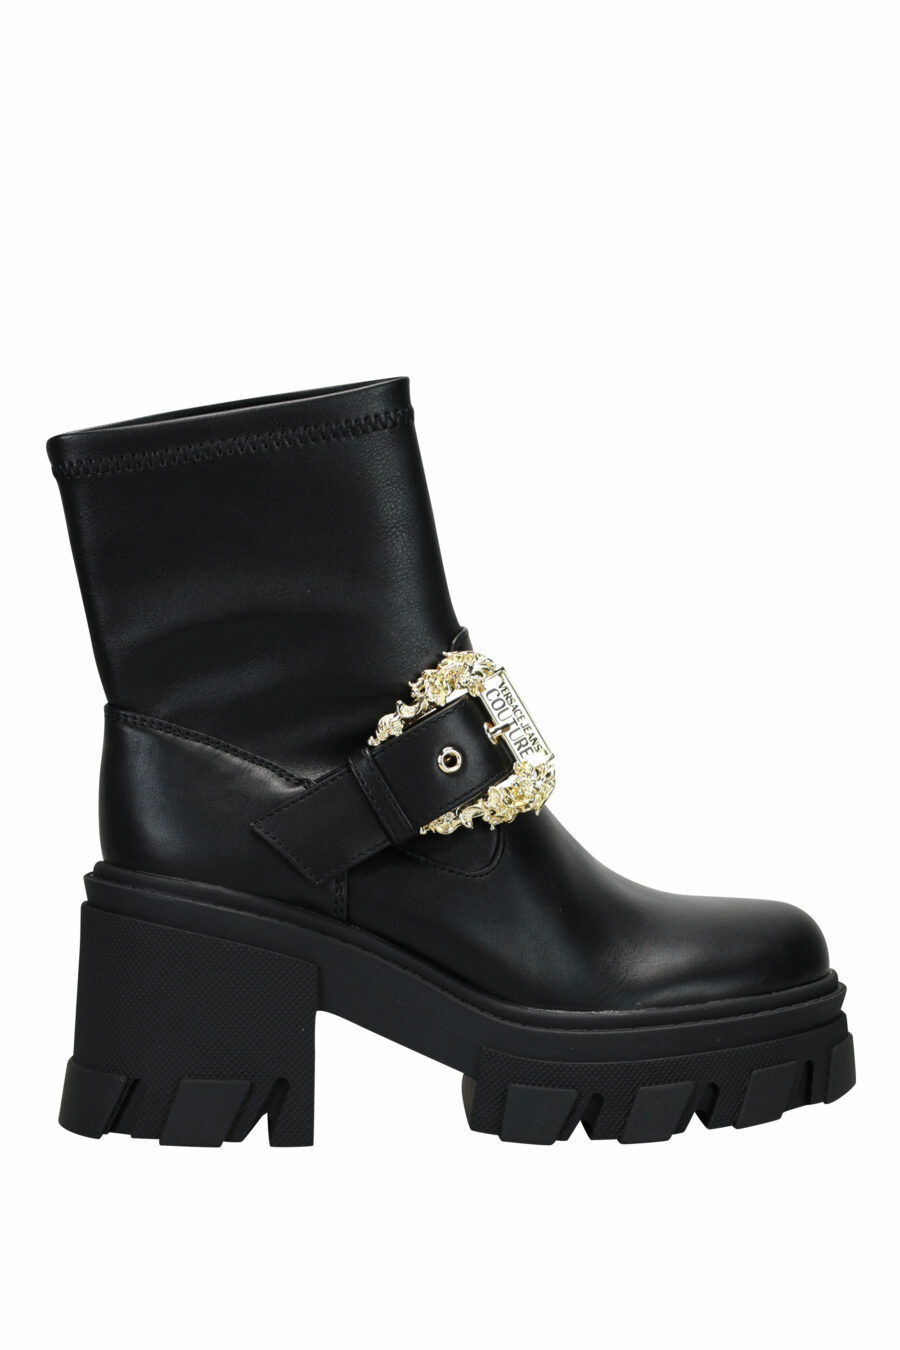 Black ankle boots with baroque buckle and platform - 8052019461084